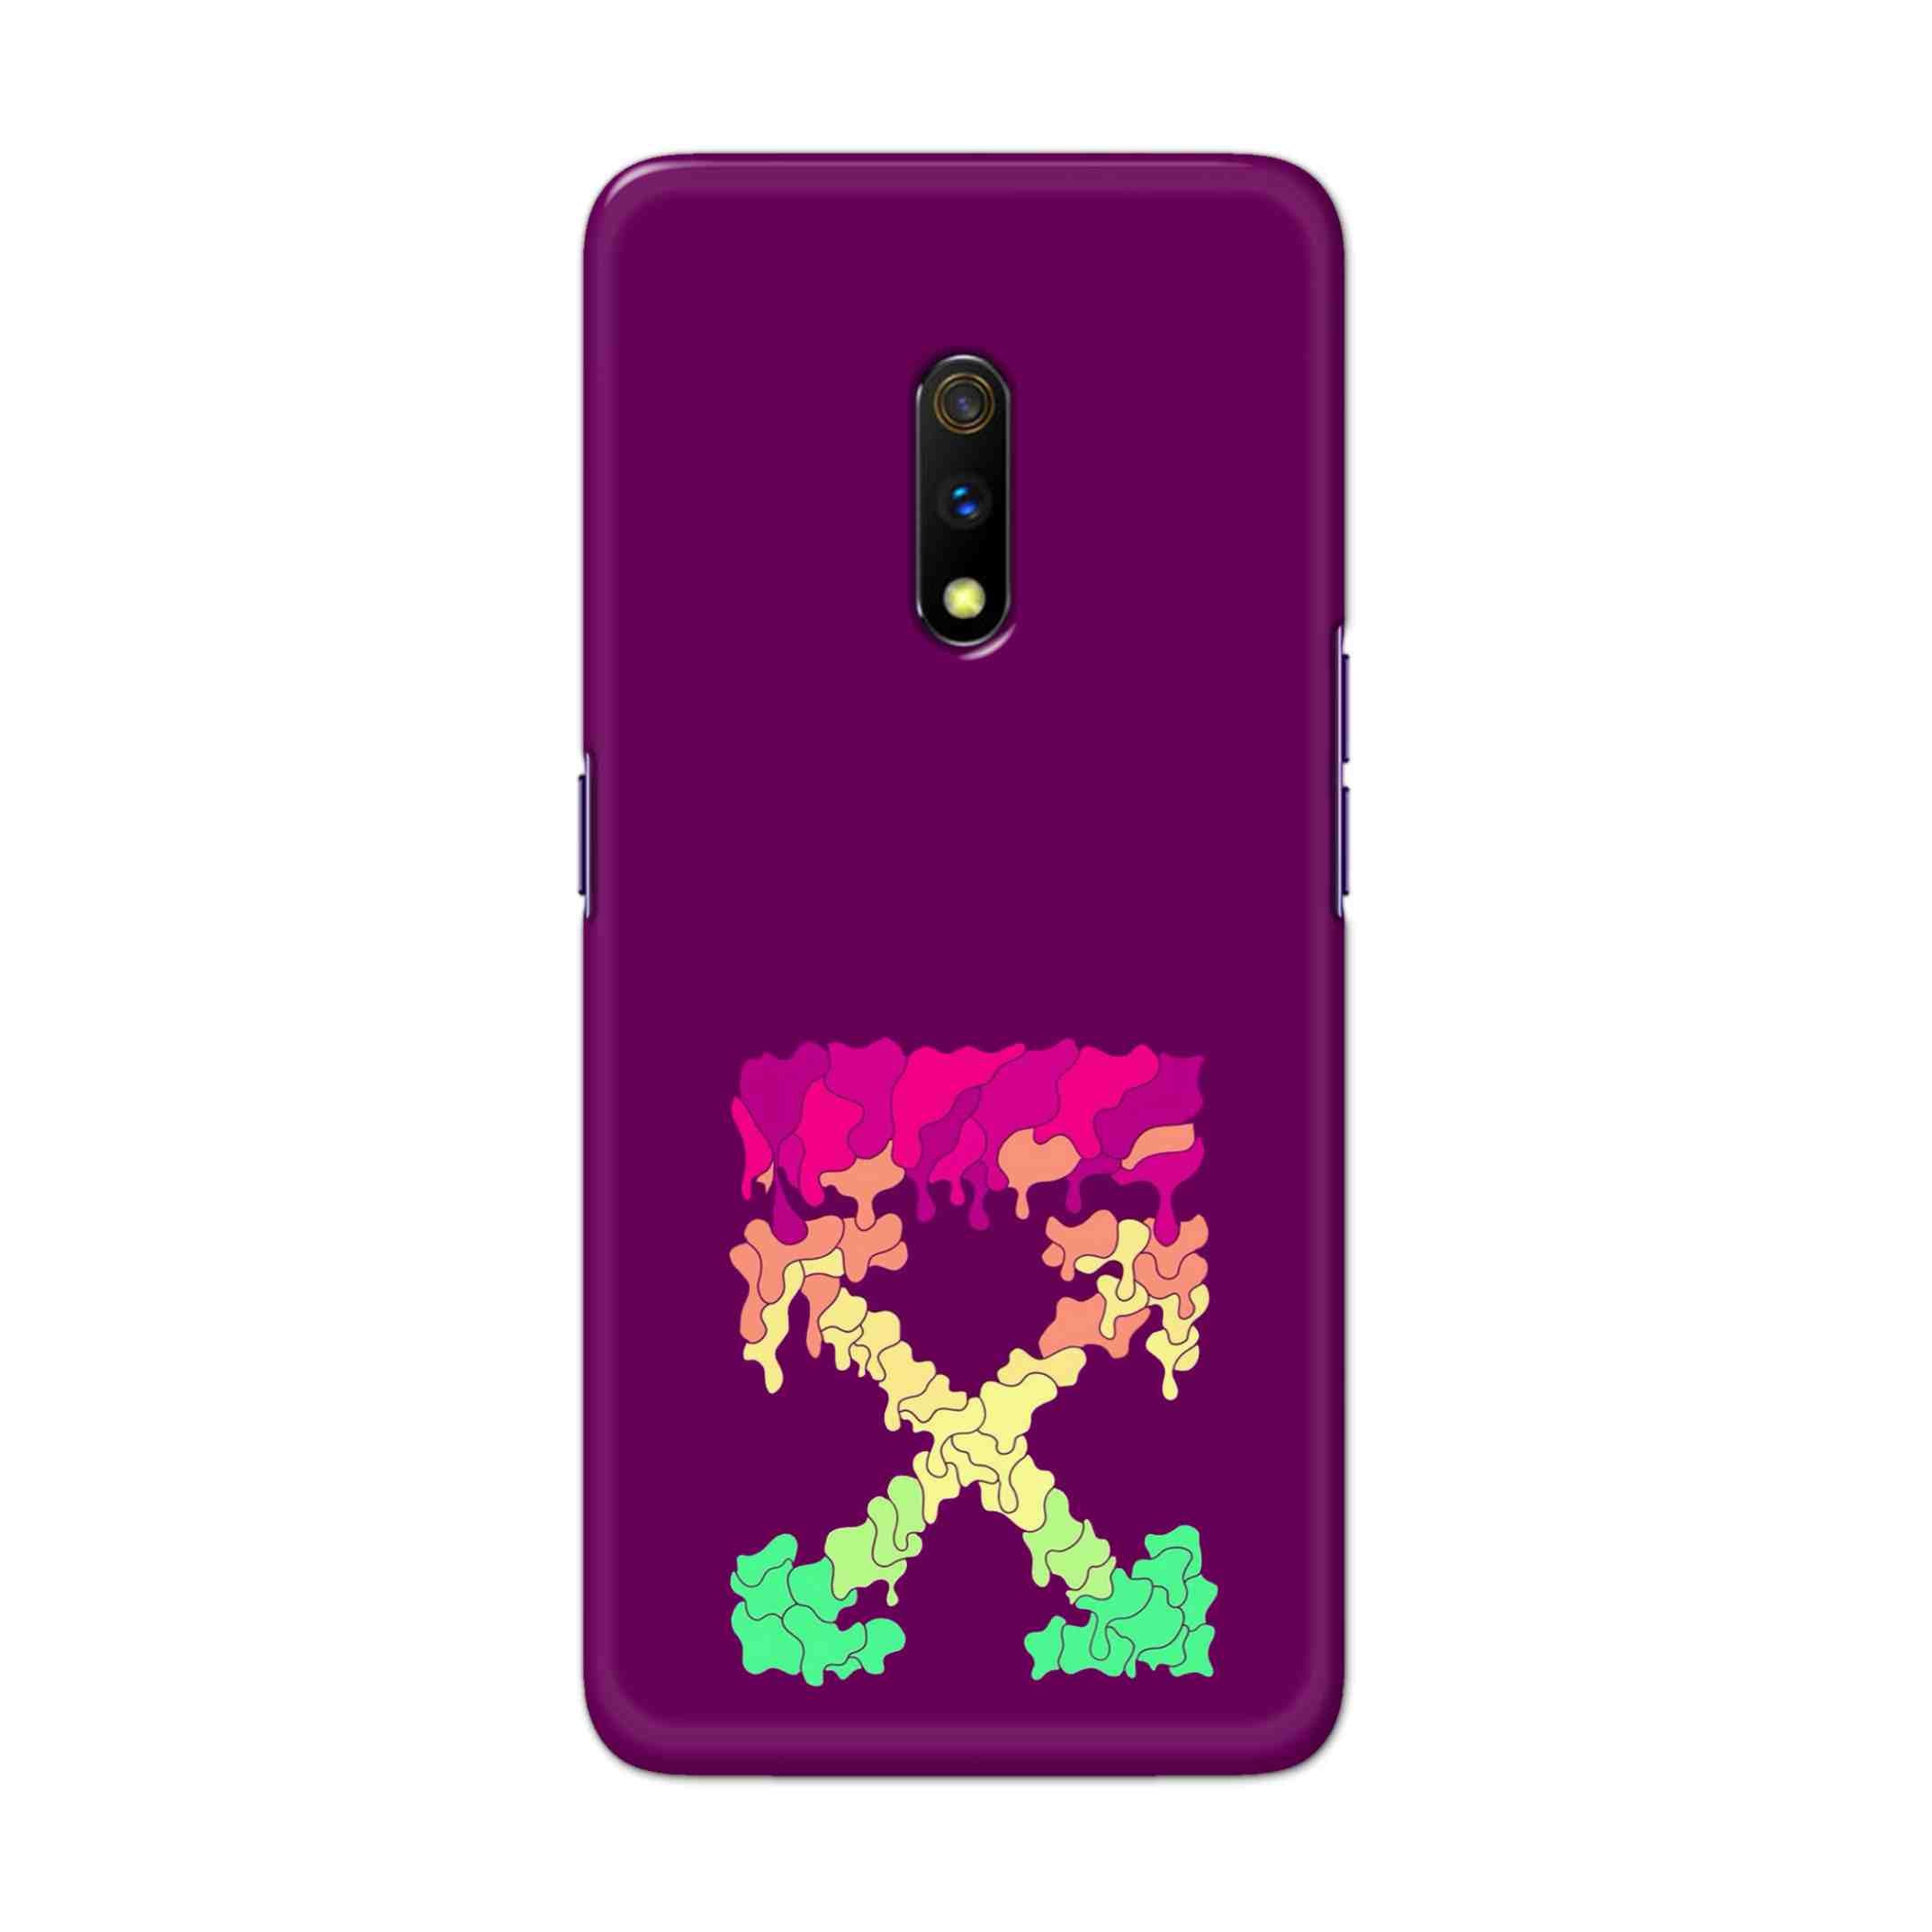 Buy X.O Hard Back Mobile Phone Case Cover For Oppo Realme X Online